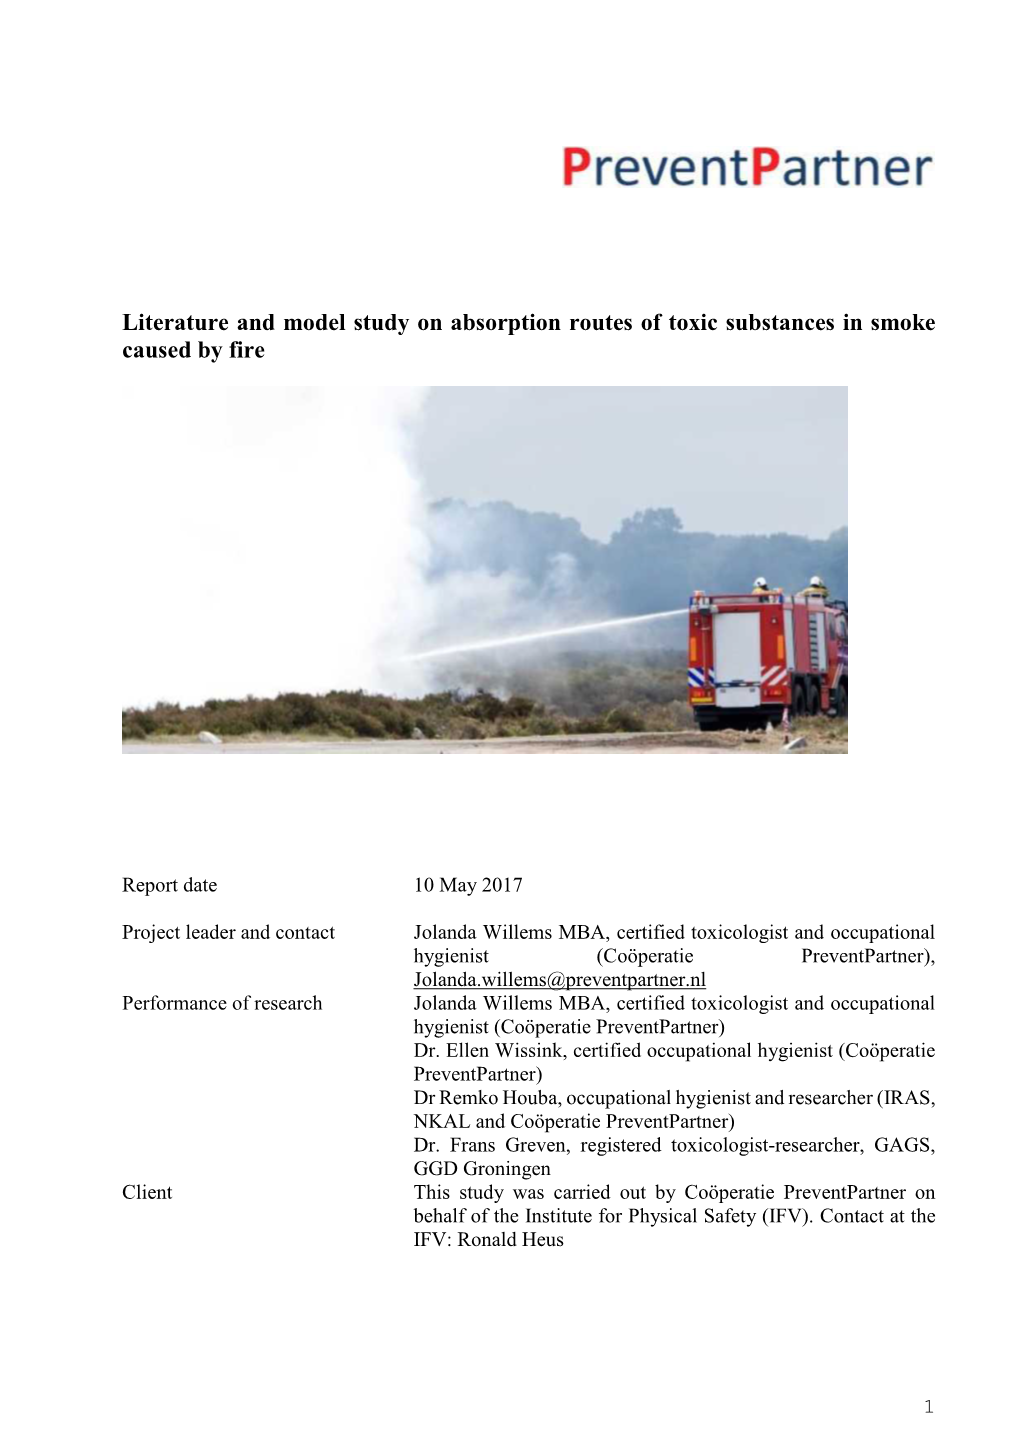 Literature and Model Study on Absorption Routes of Toxic Substances in Smoke Caused by Fire